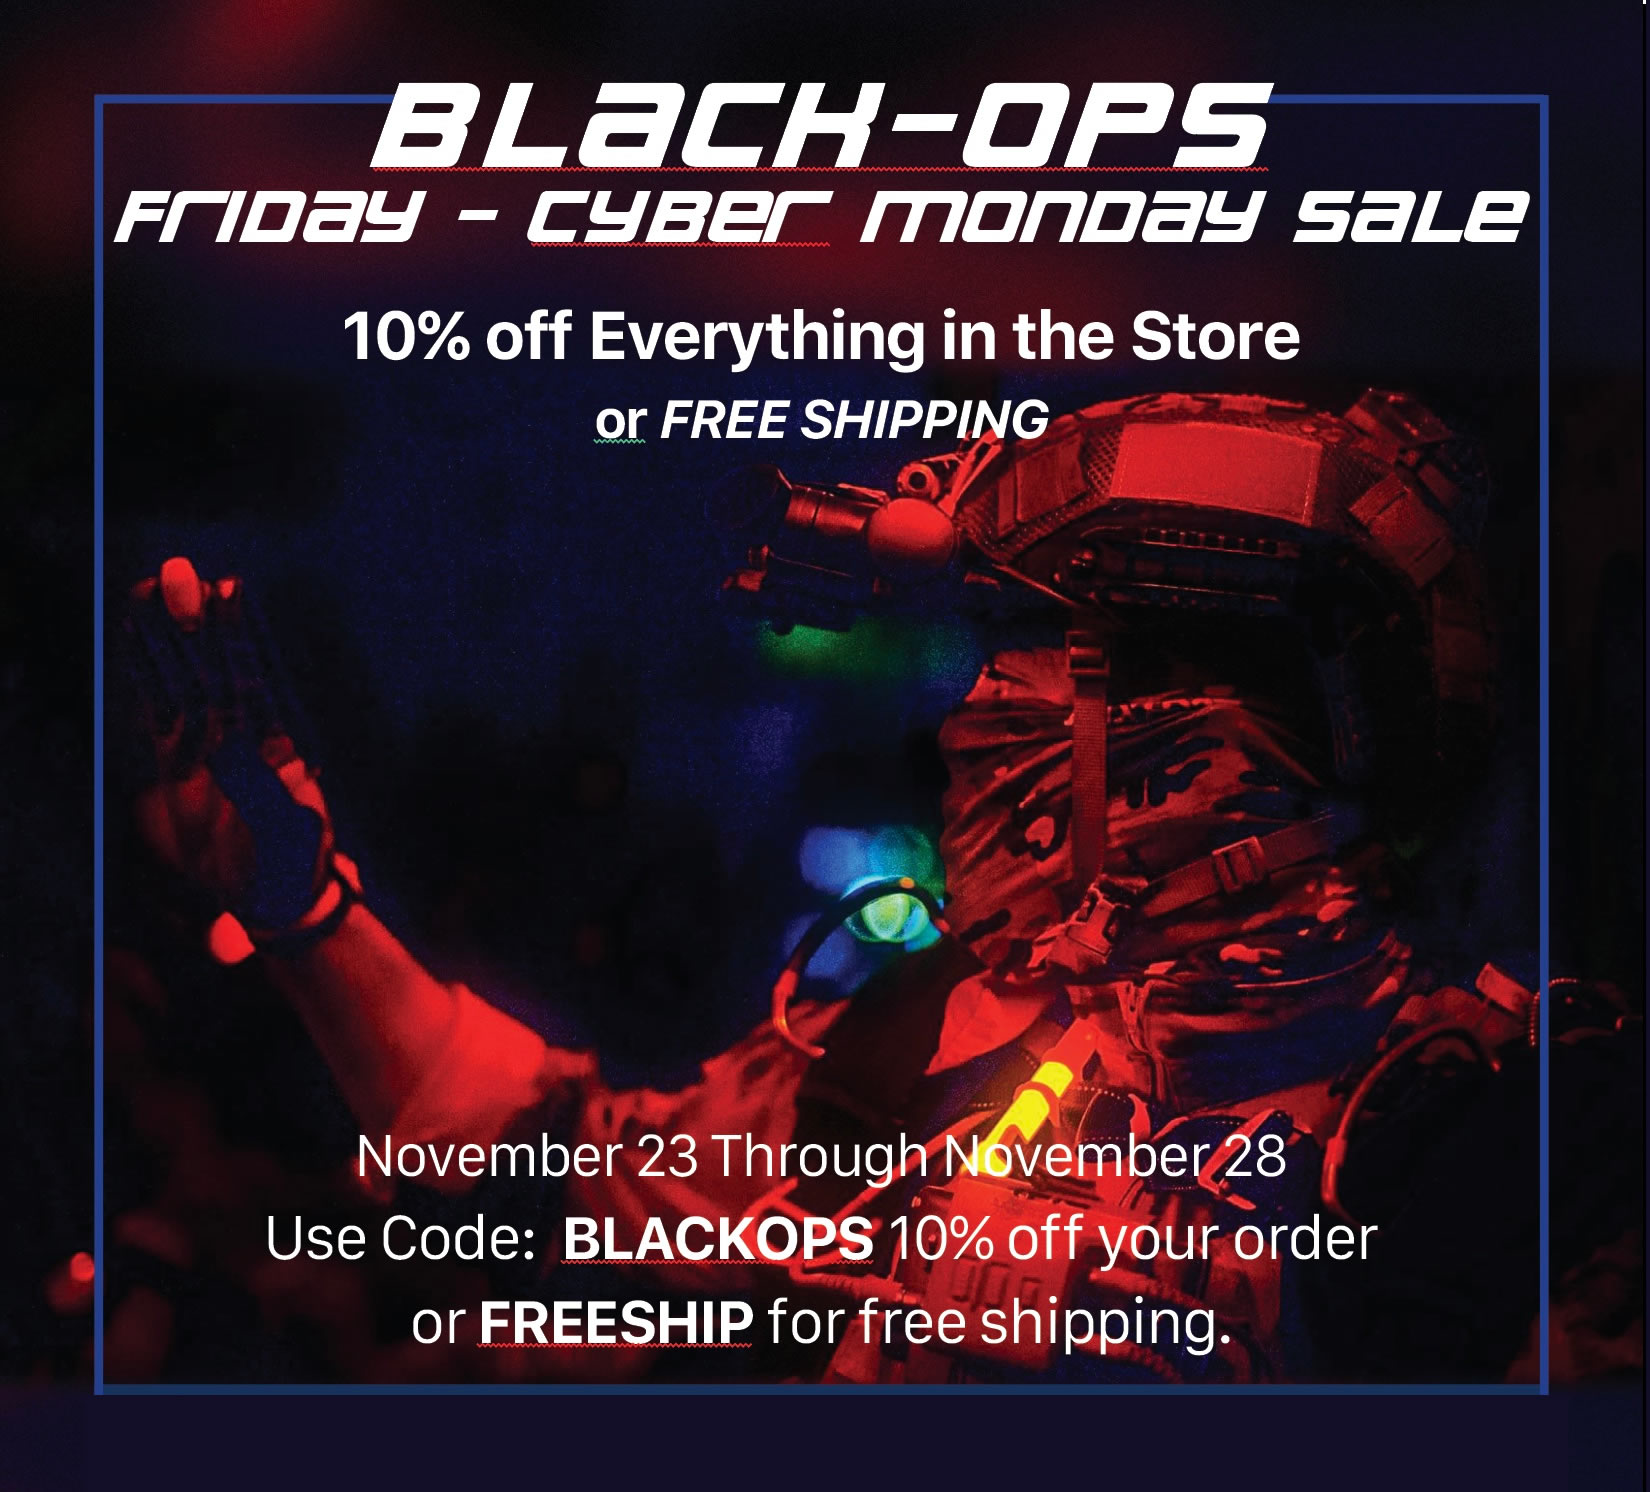 BLACK-OPS Sale. 10% off Everything in the Store or FREE SHIPPING!